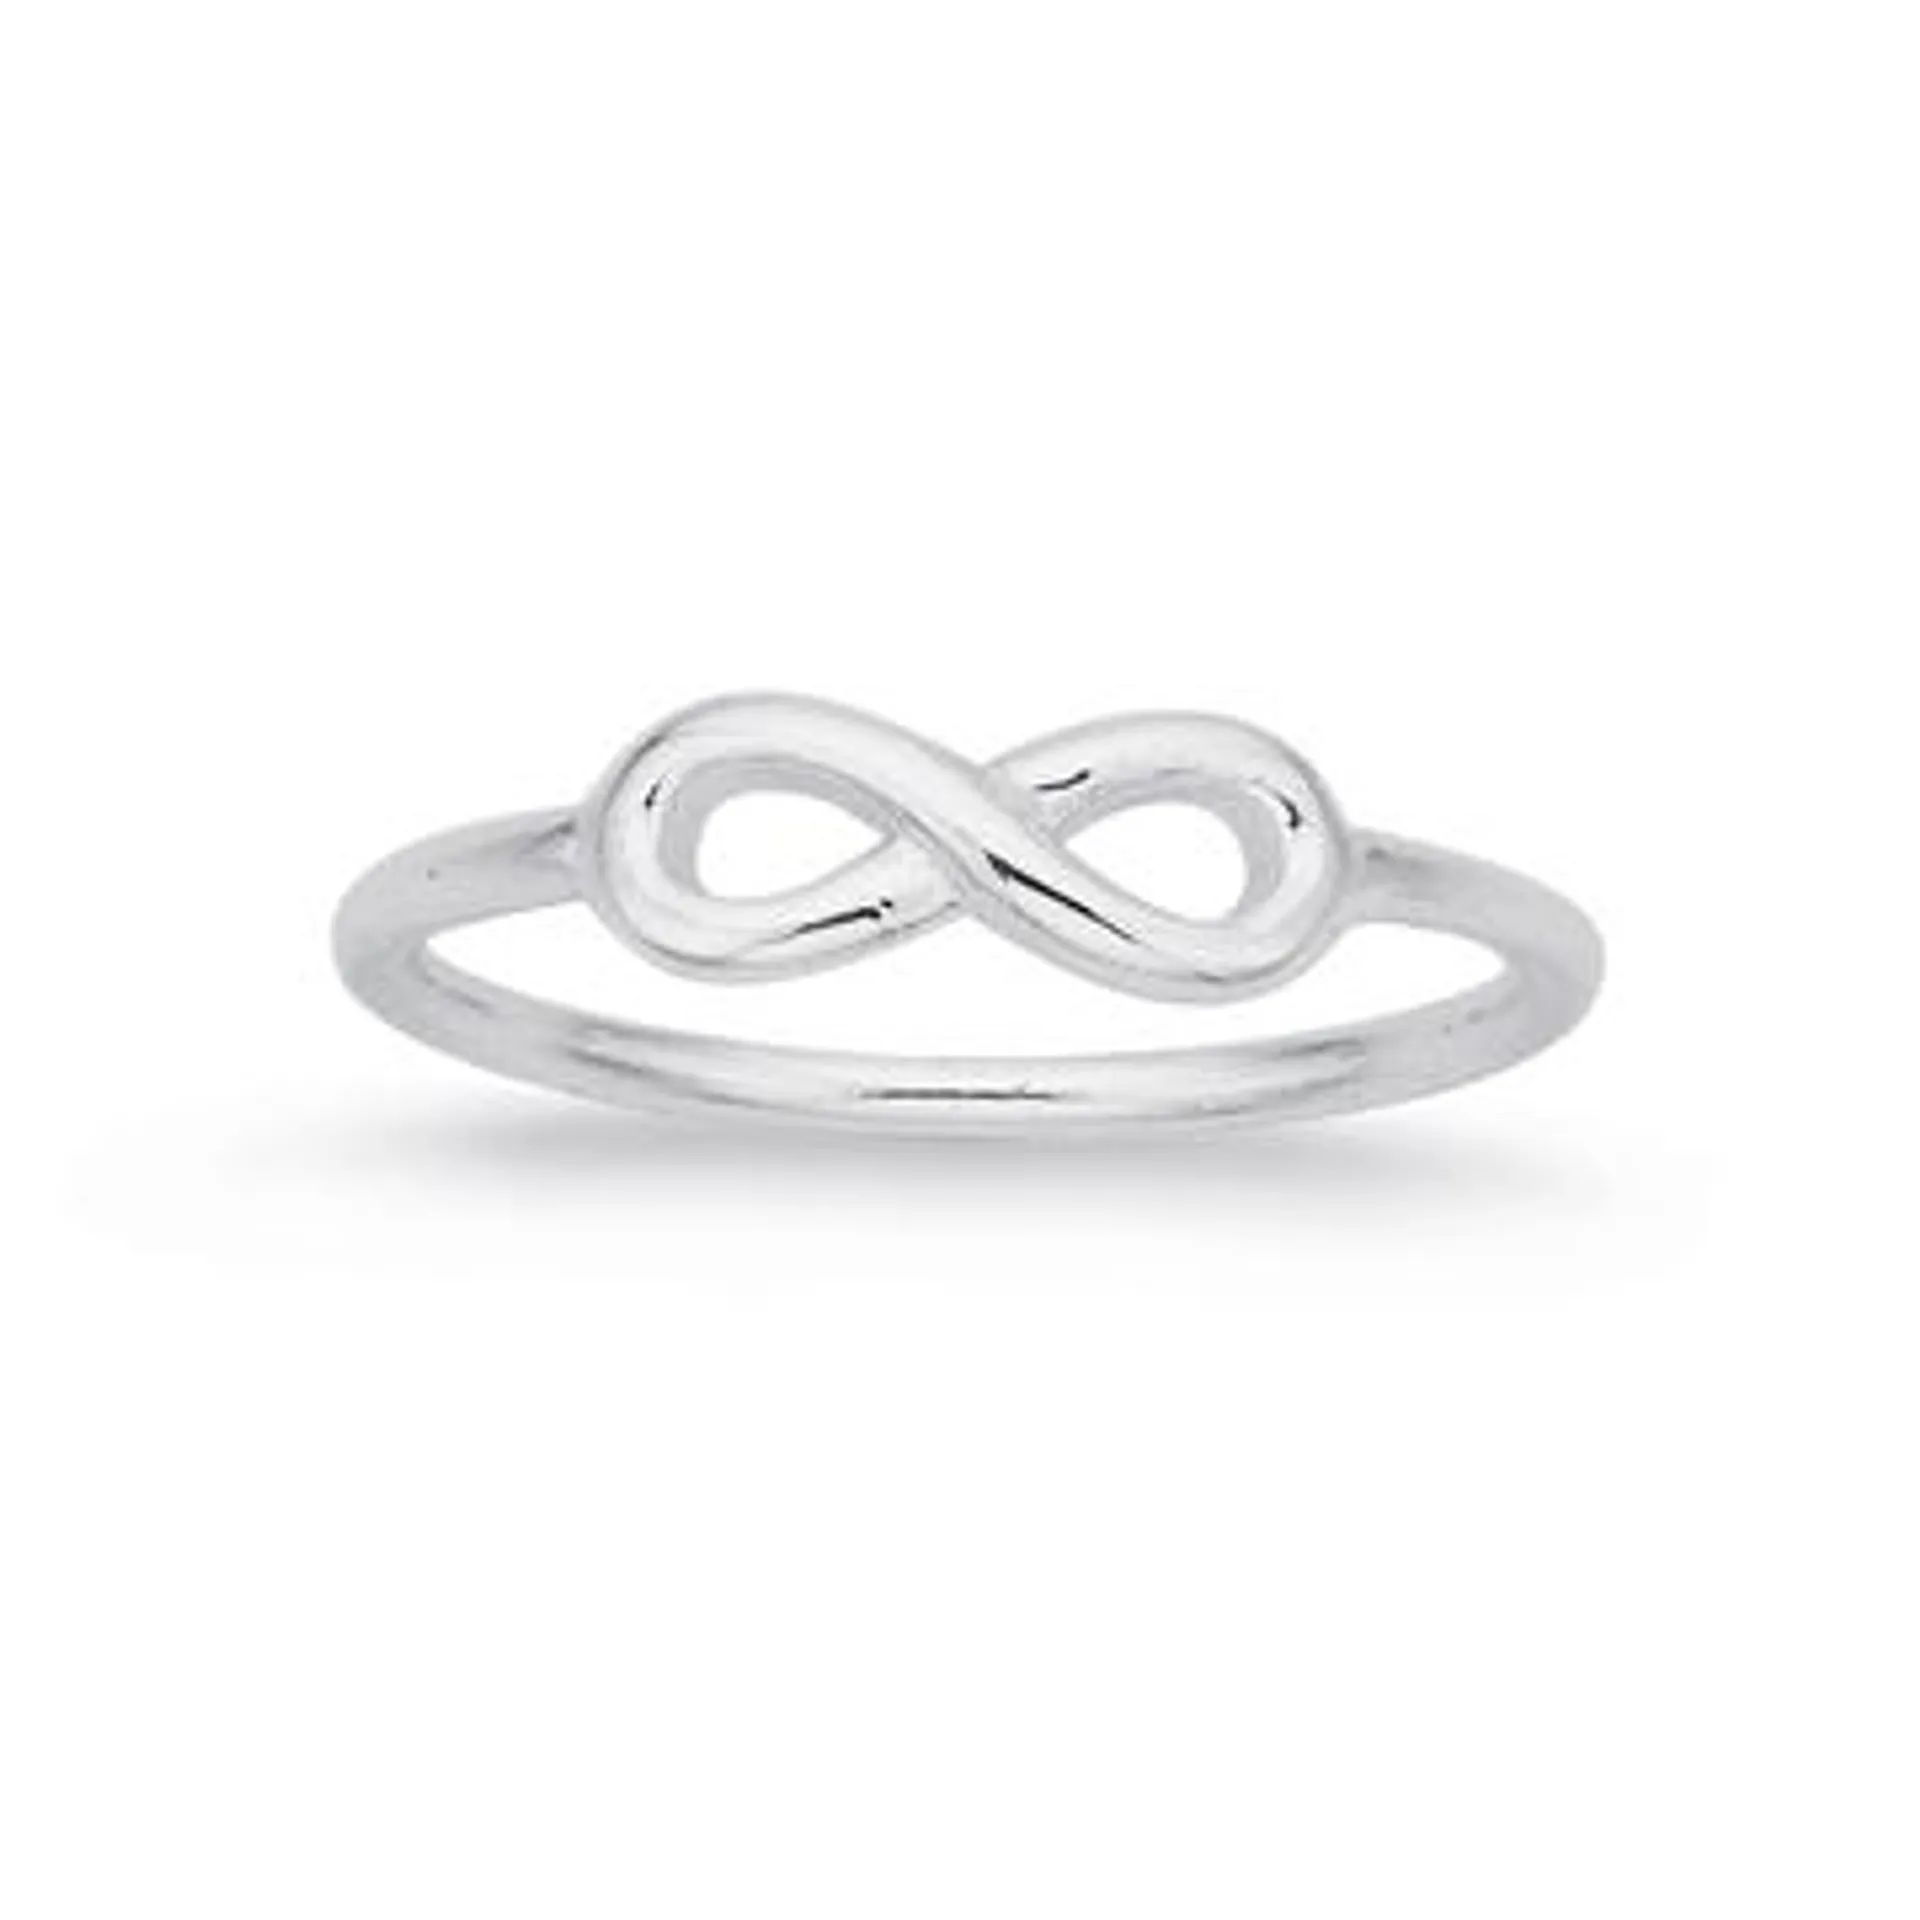 Sterling Silver Infinity Mini Ring Size G